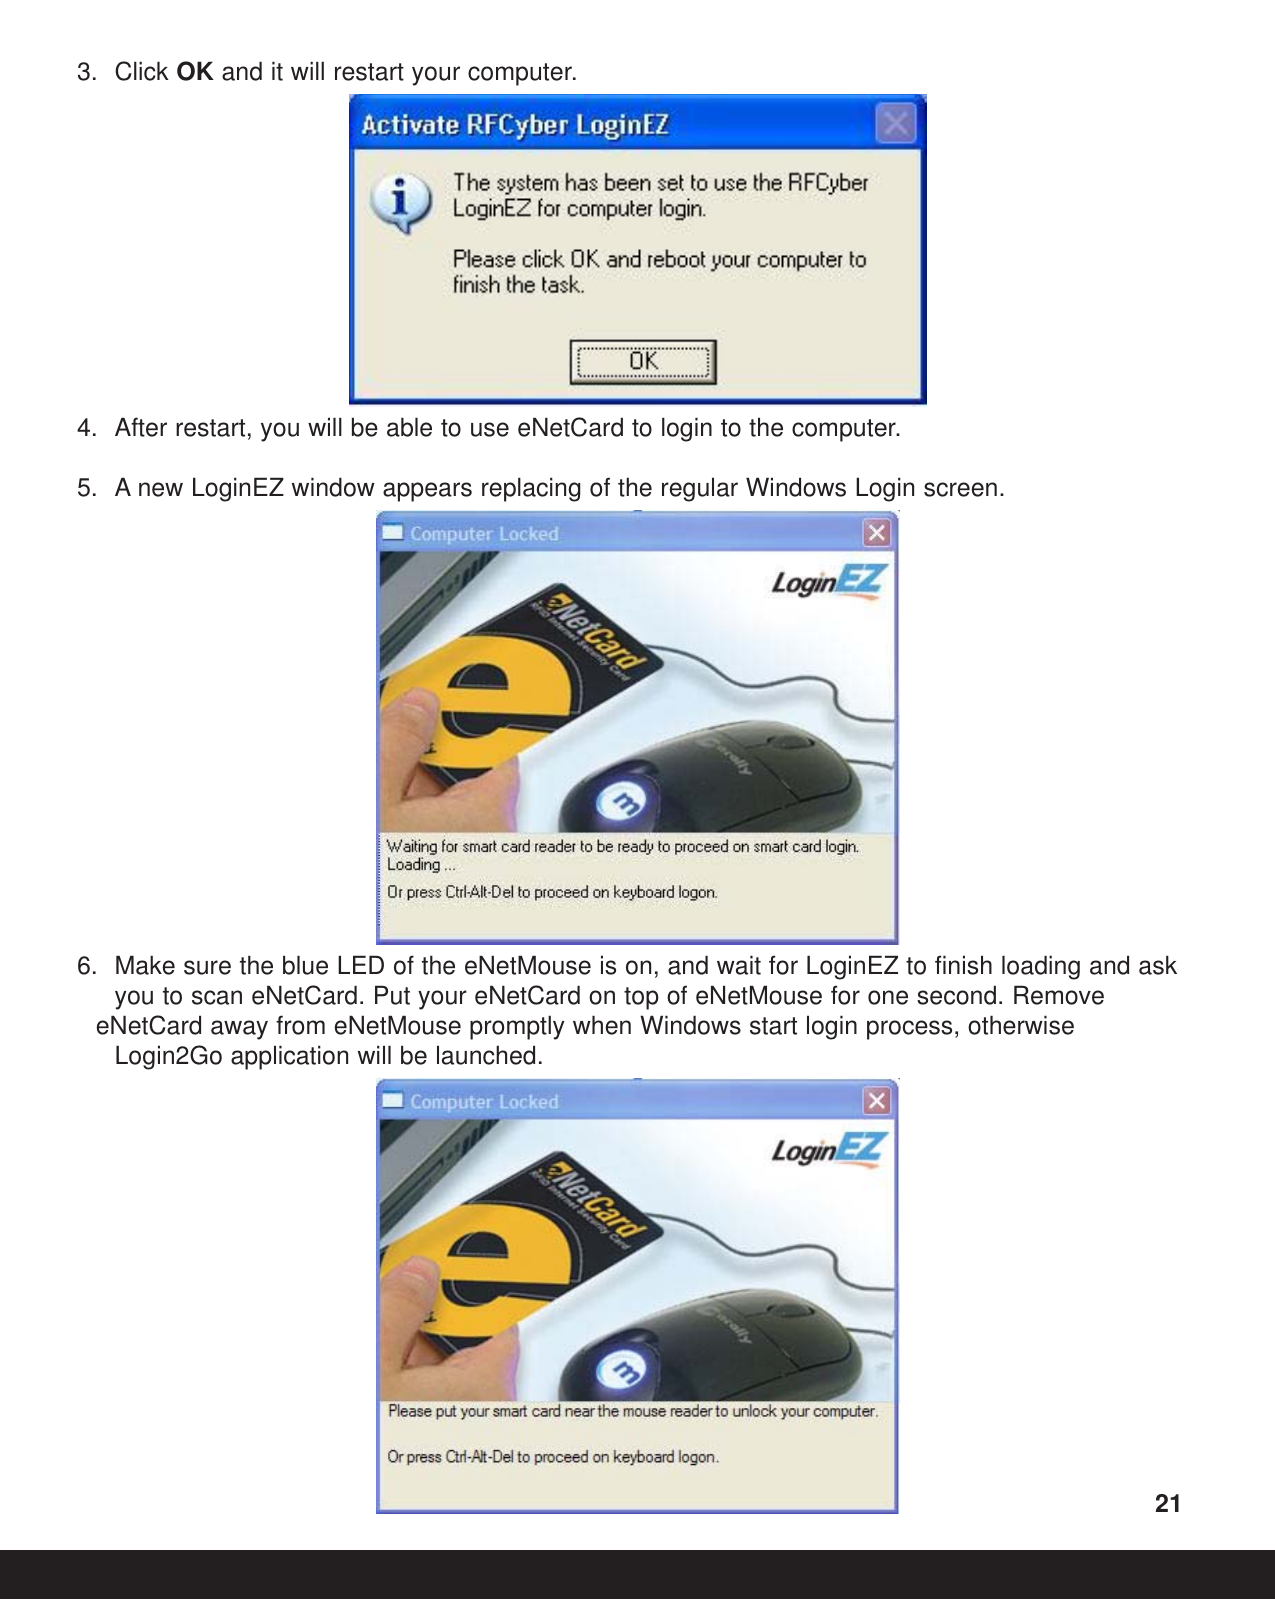 3. Click OK and it will restart your computer.4. After restart, you will be able to use eNetCard to login to the computer.5. A new LoginEZ window appears replacing of the regular Windows Login screen.6. Make sure the blue LED of the eNetMouse is on, and wait for LoginEZ to finish loading and ask you to scan eNetCard. Put your eNetCard on top of eNetMouse for one second. Remove eNetCard away from eNetMouse promptly when Windows start login process, otherwise Login2Go application will be launched.21